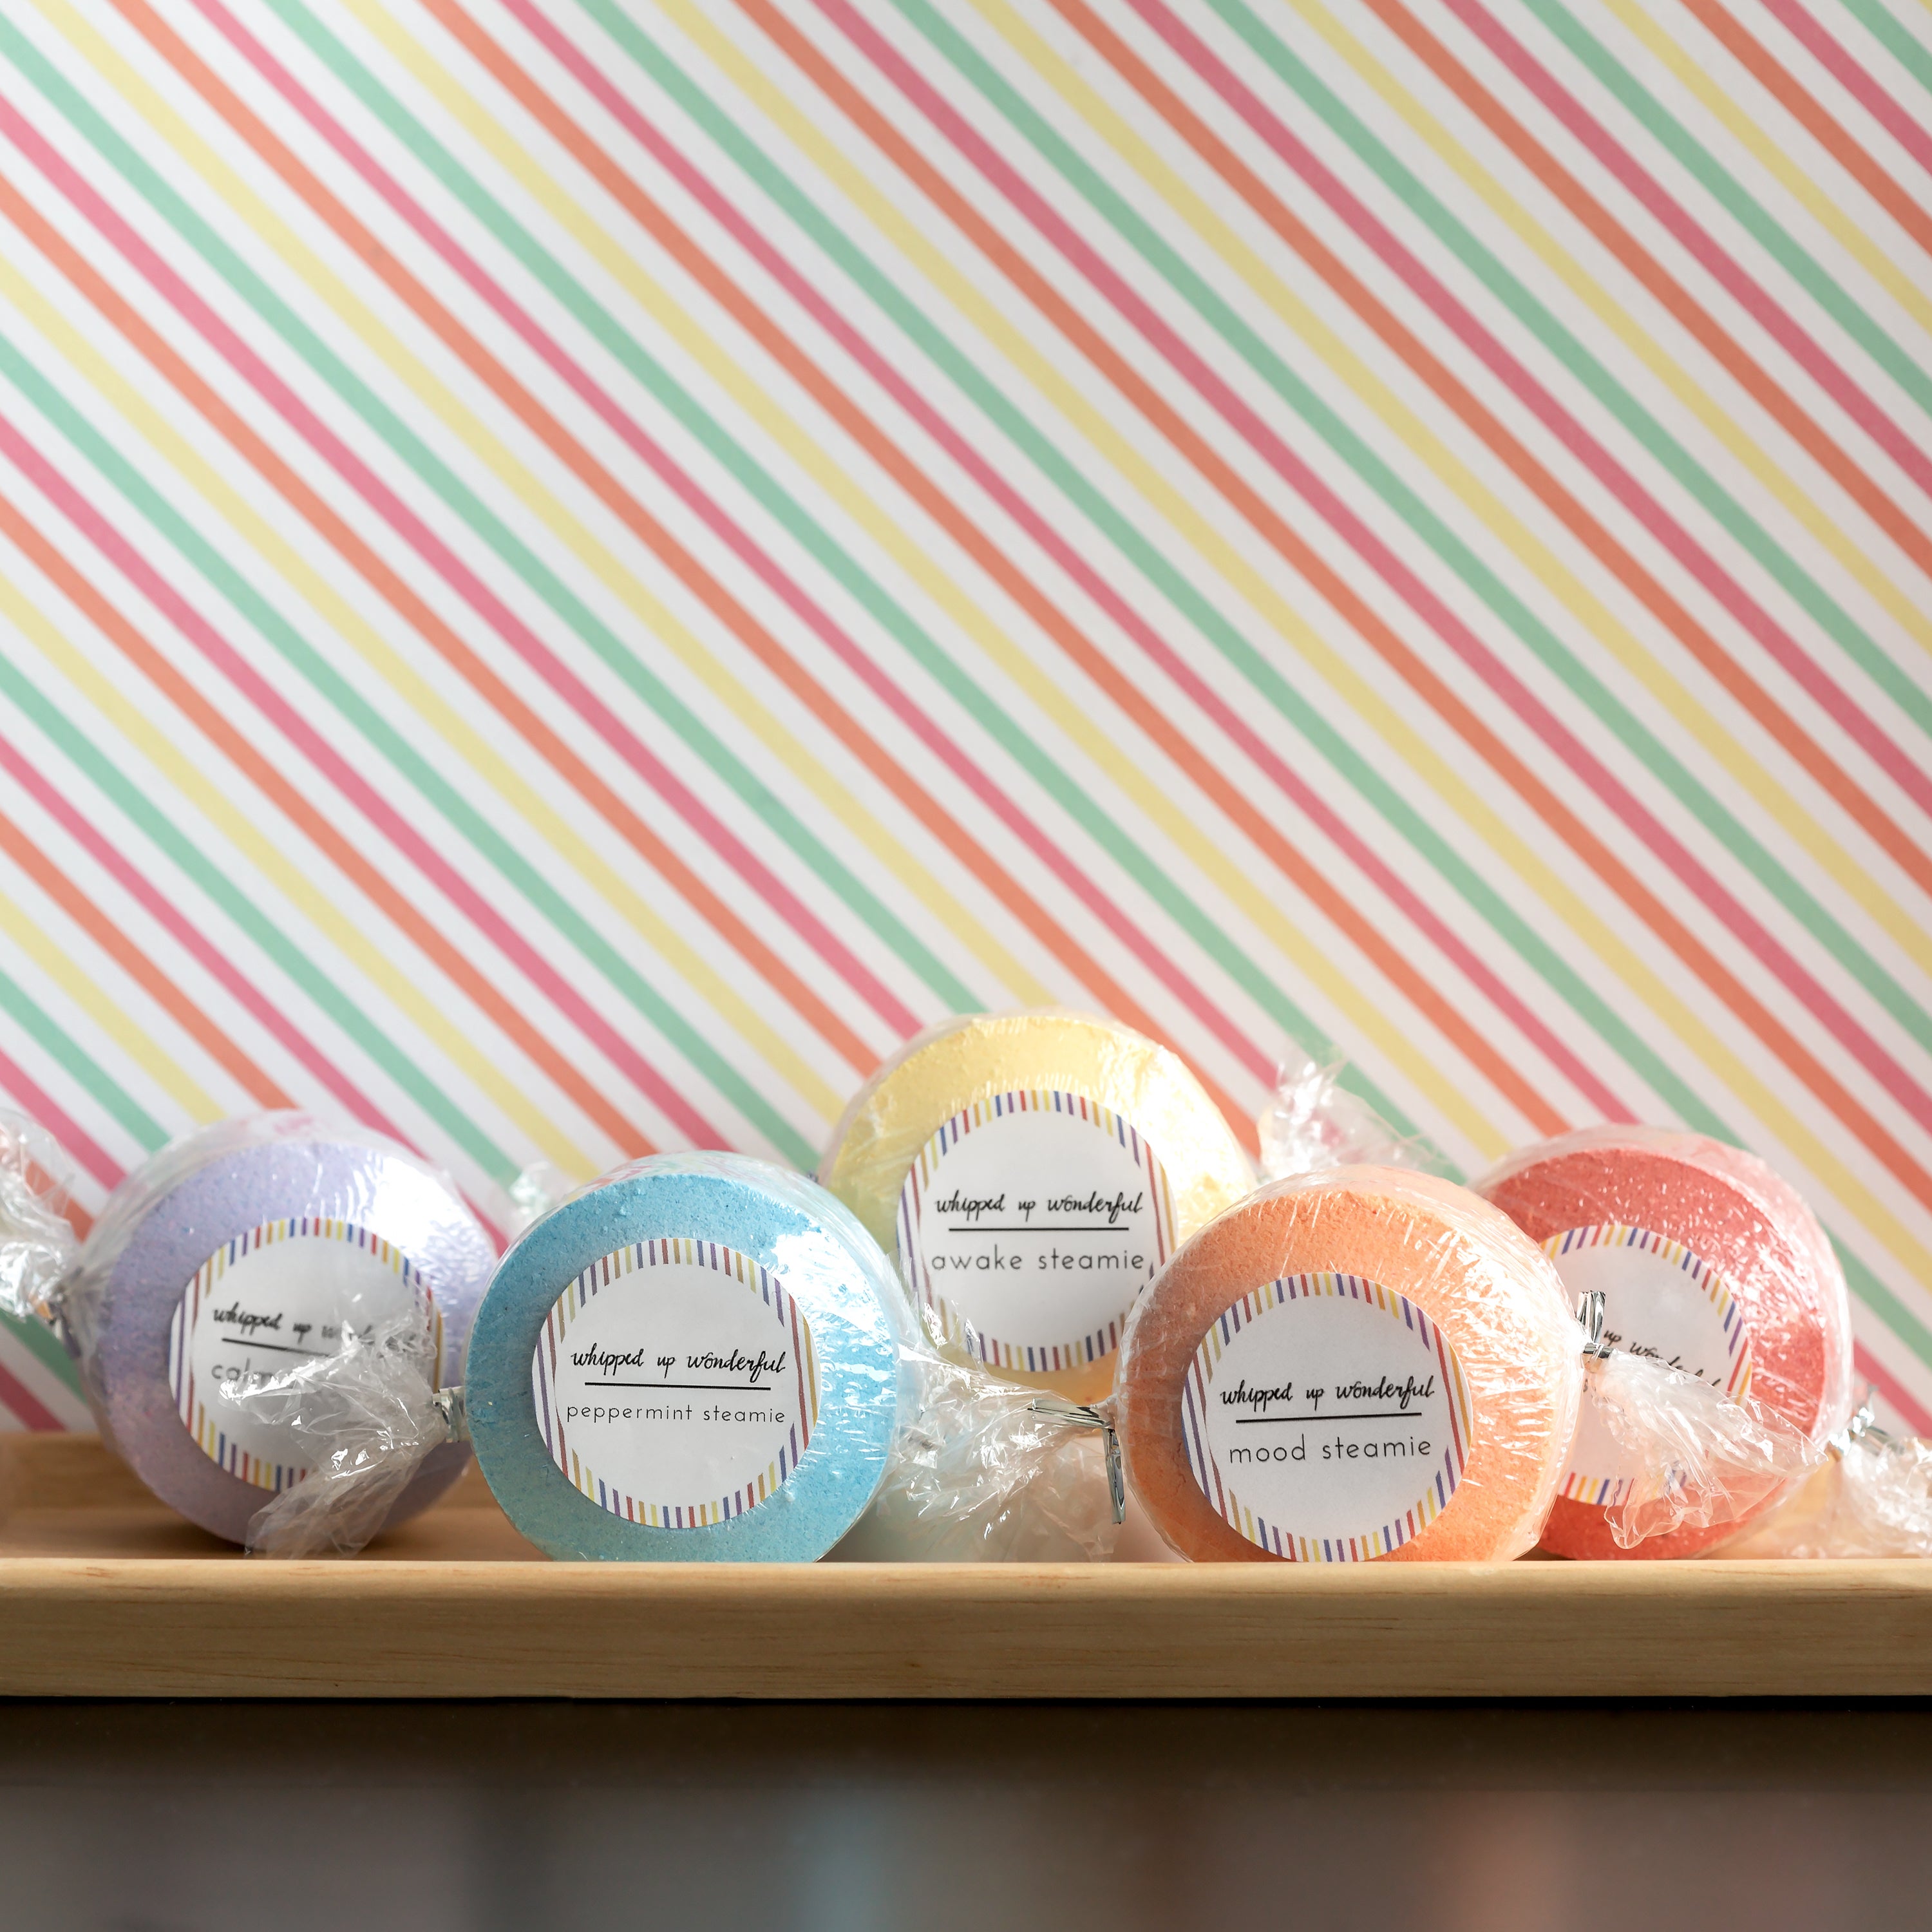 Whipped Up Wonderful - Shower Steamie Singles - Simple Packaging